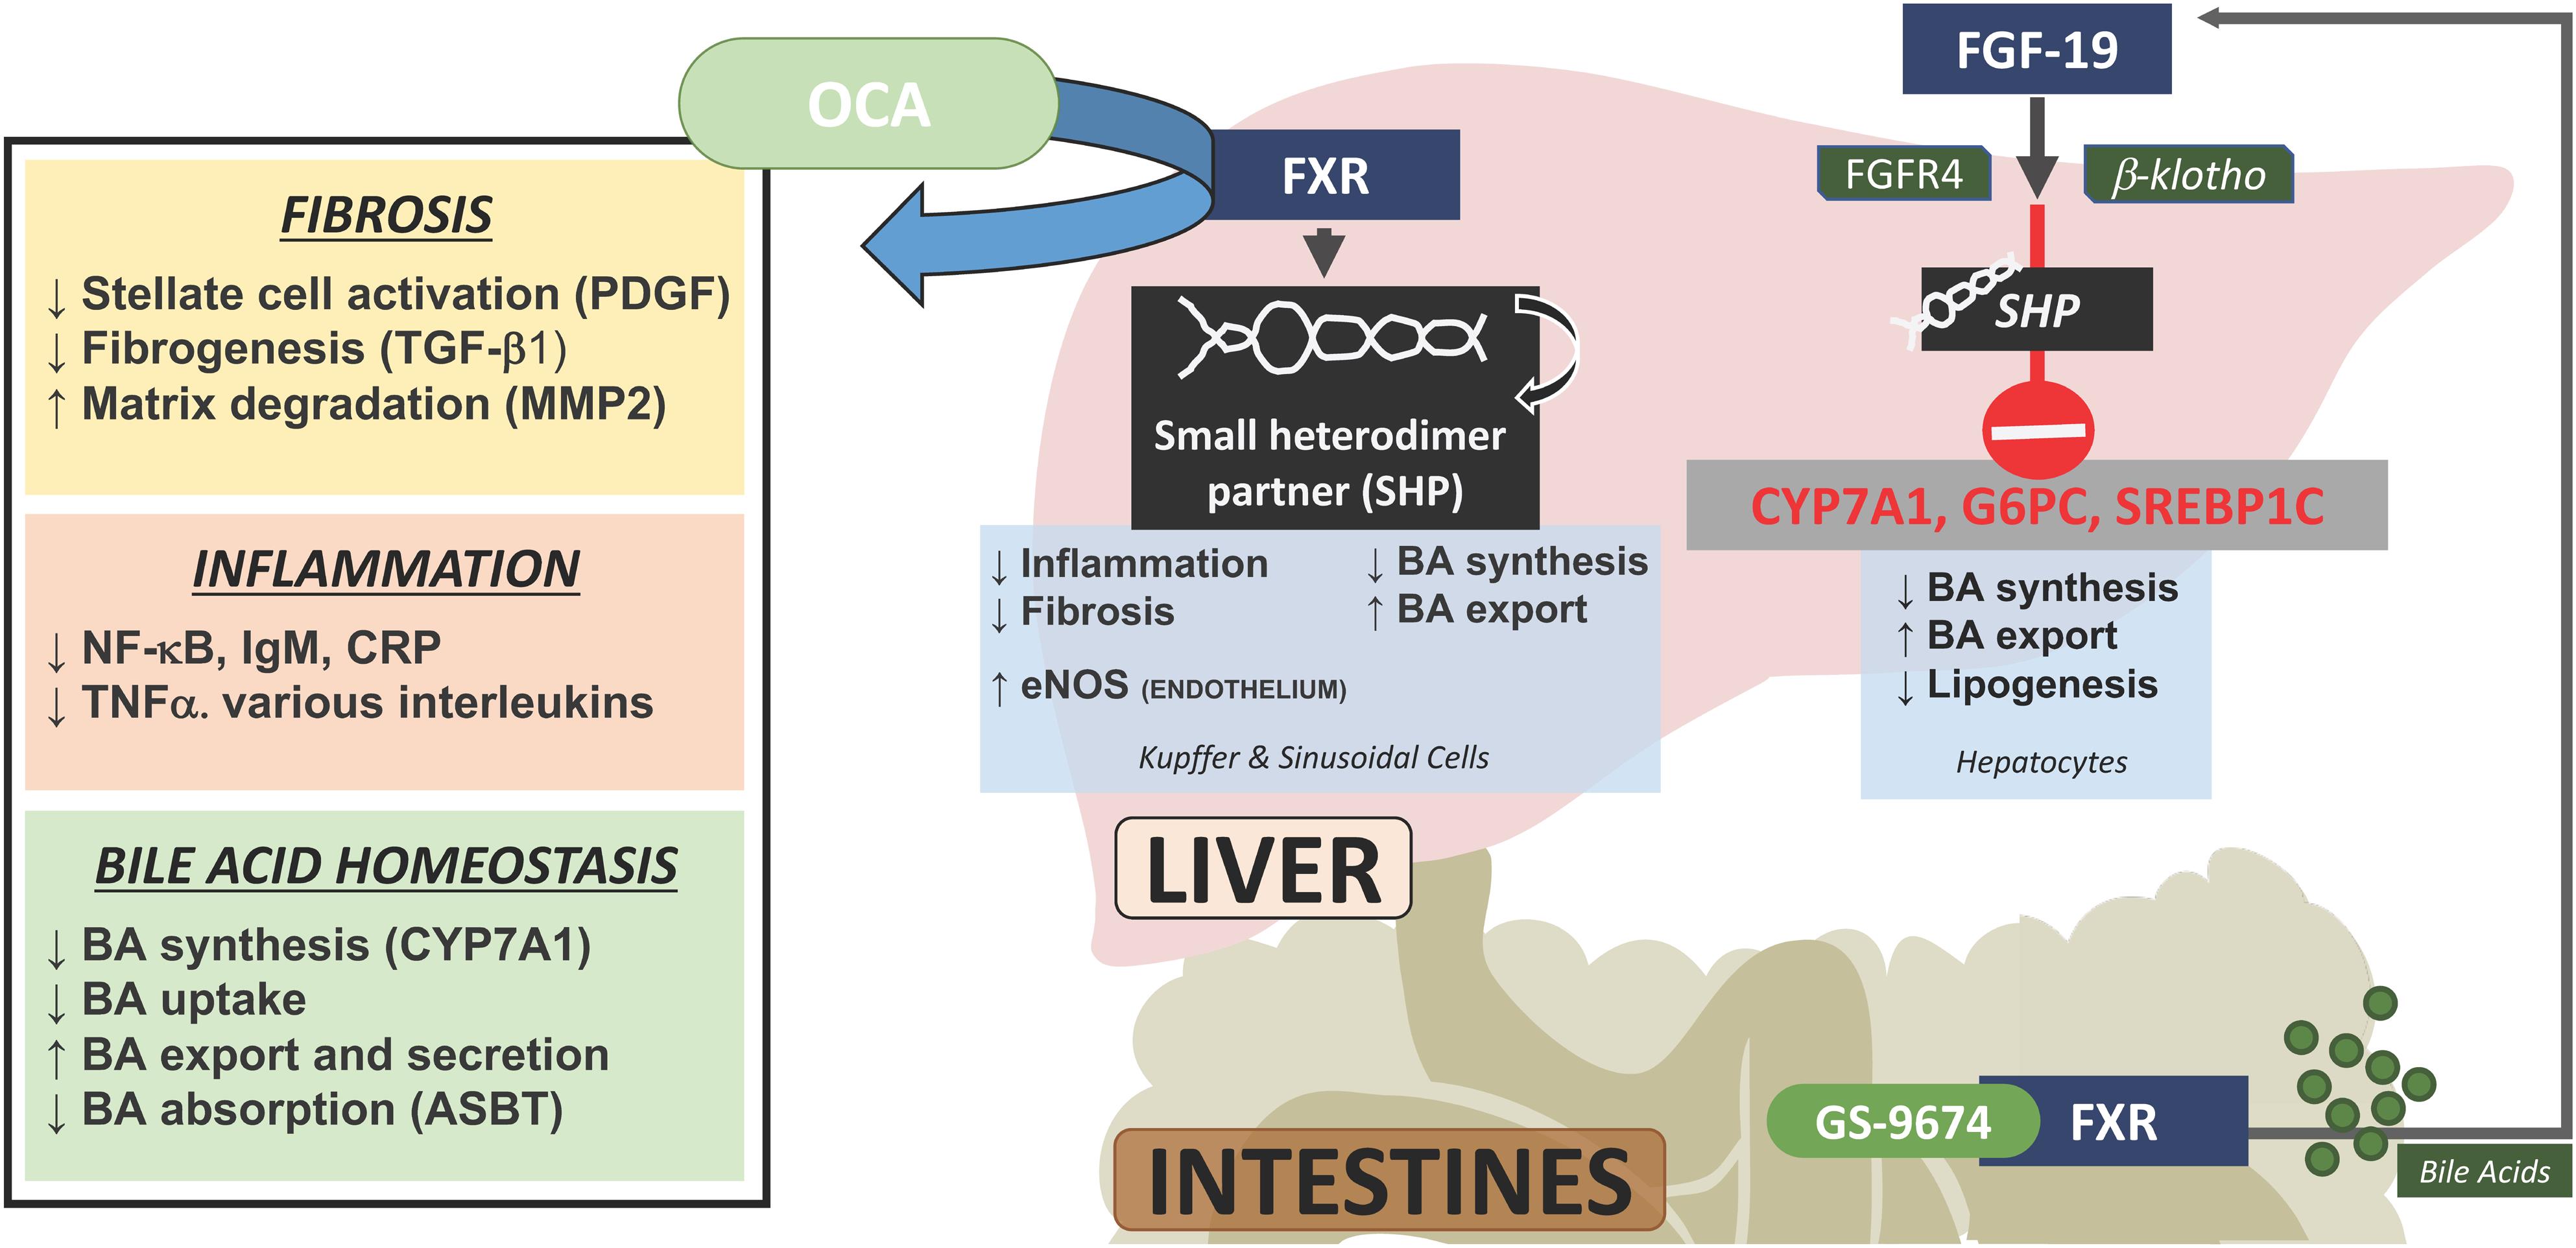 Steroidal and nonsteroidal FXR agonists and FGF-19 mechanism of action.